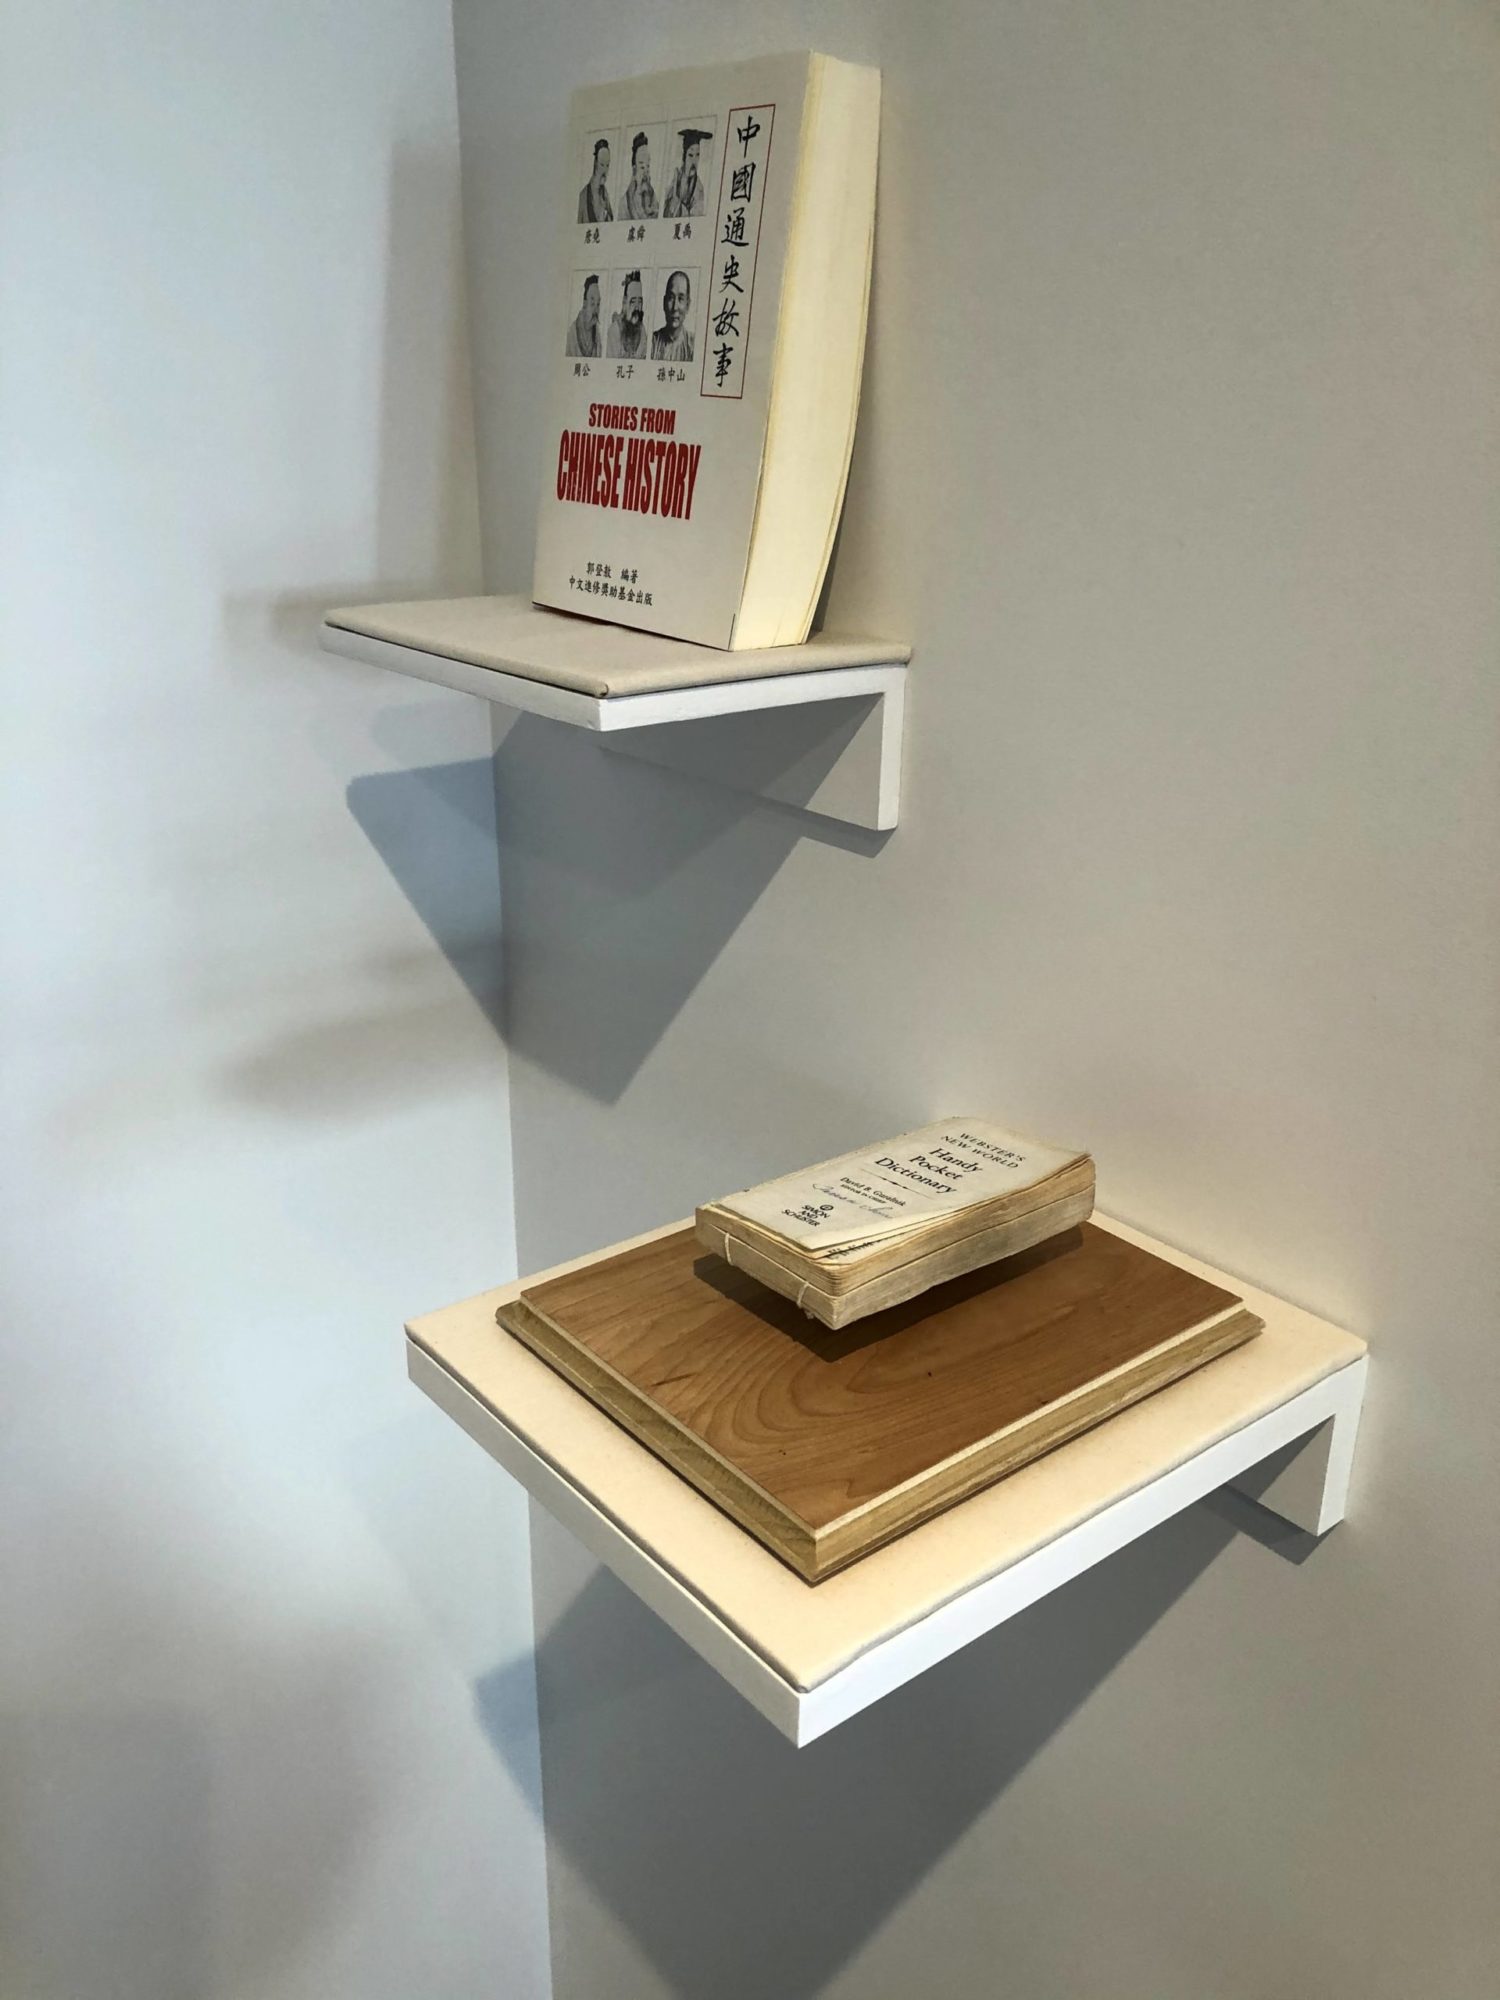 An angled installation shot. The view features two square floating shelves at staggered heights. The shelf on the left is hire and features a book leaning against the wall with the cover facing out. The shelf on the right is lower and features two books, one stacked on top of the other. Both are facing up.